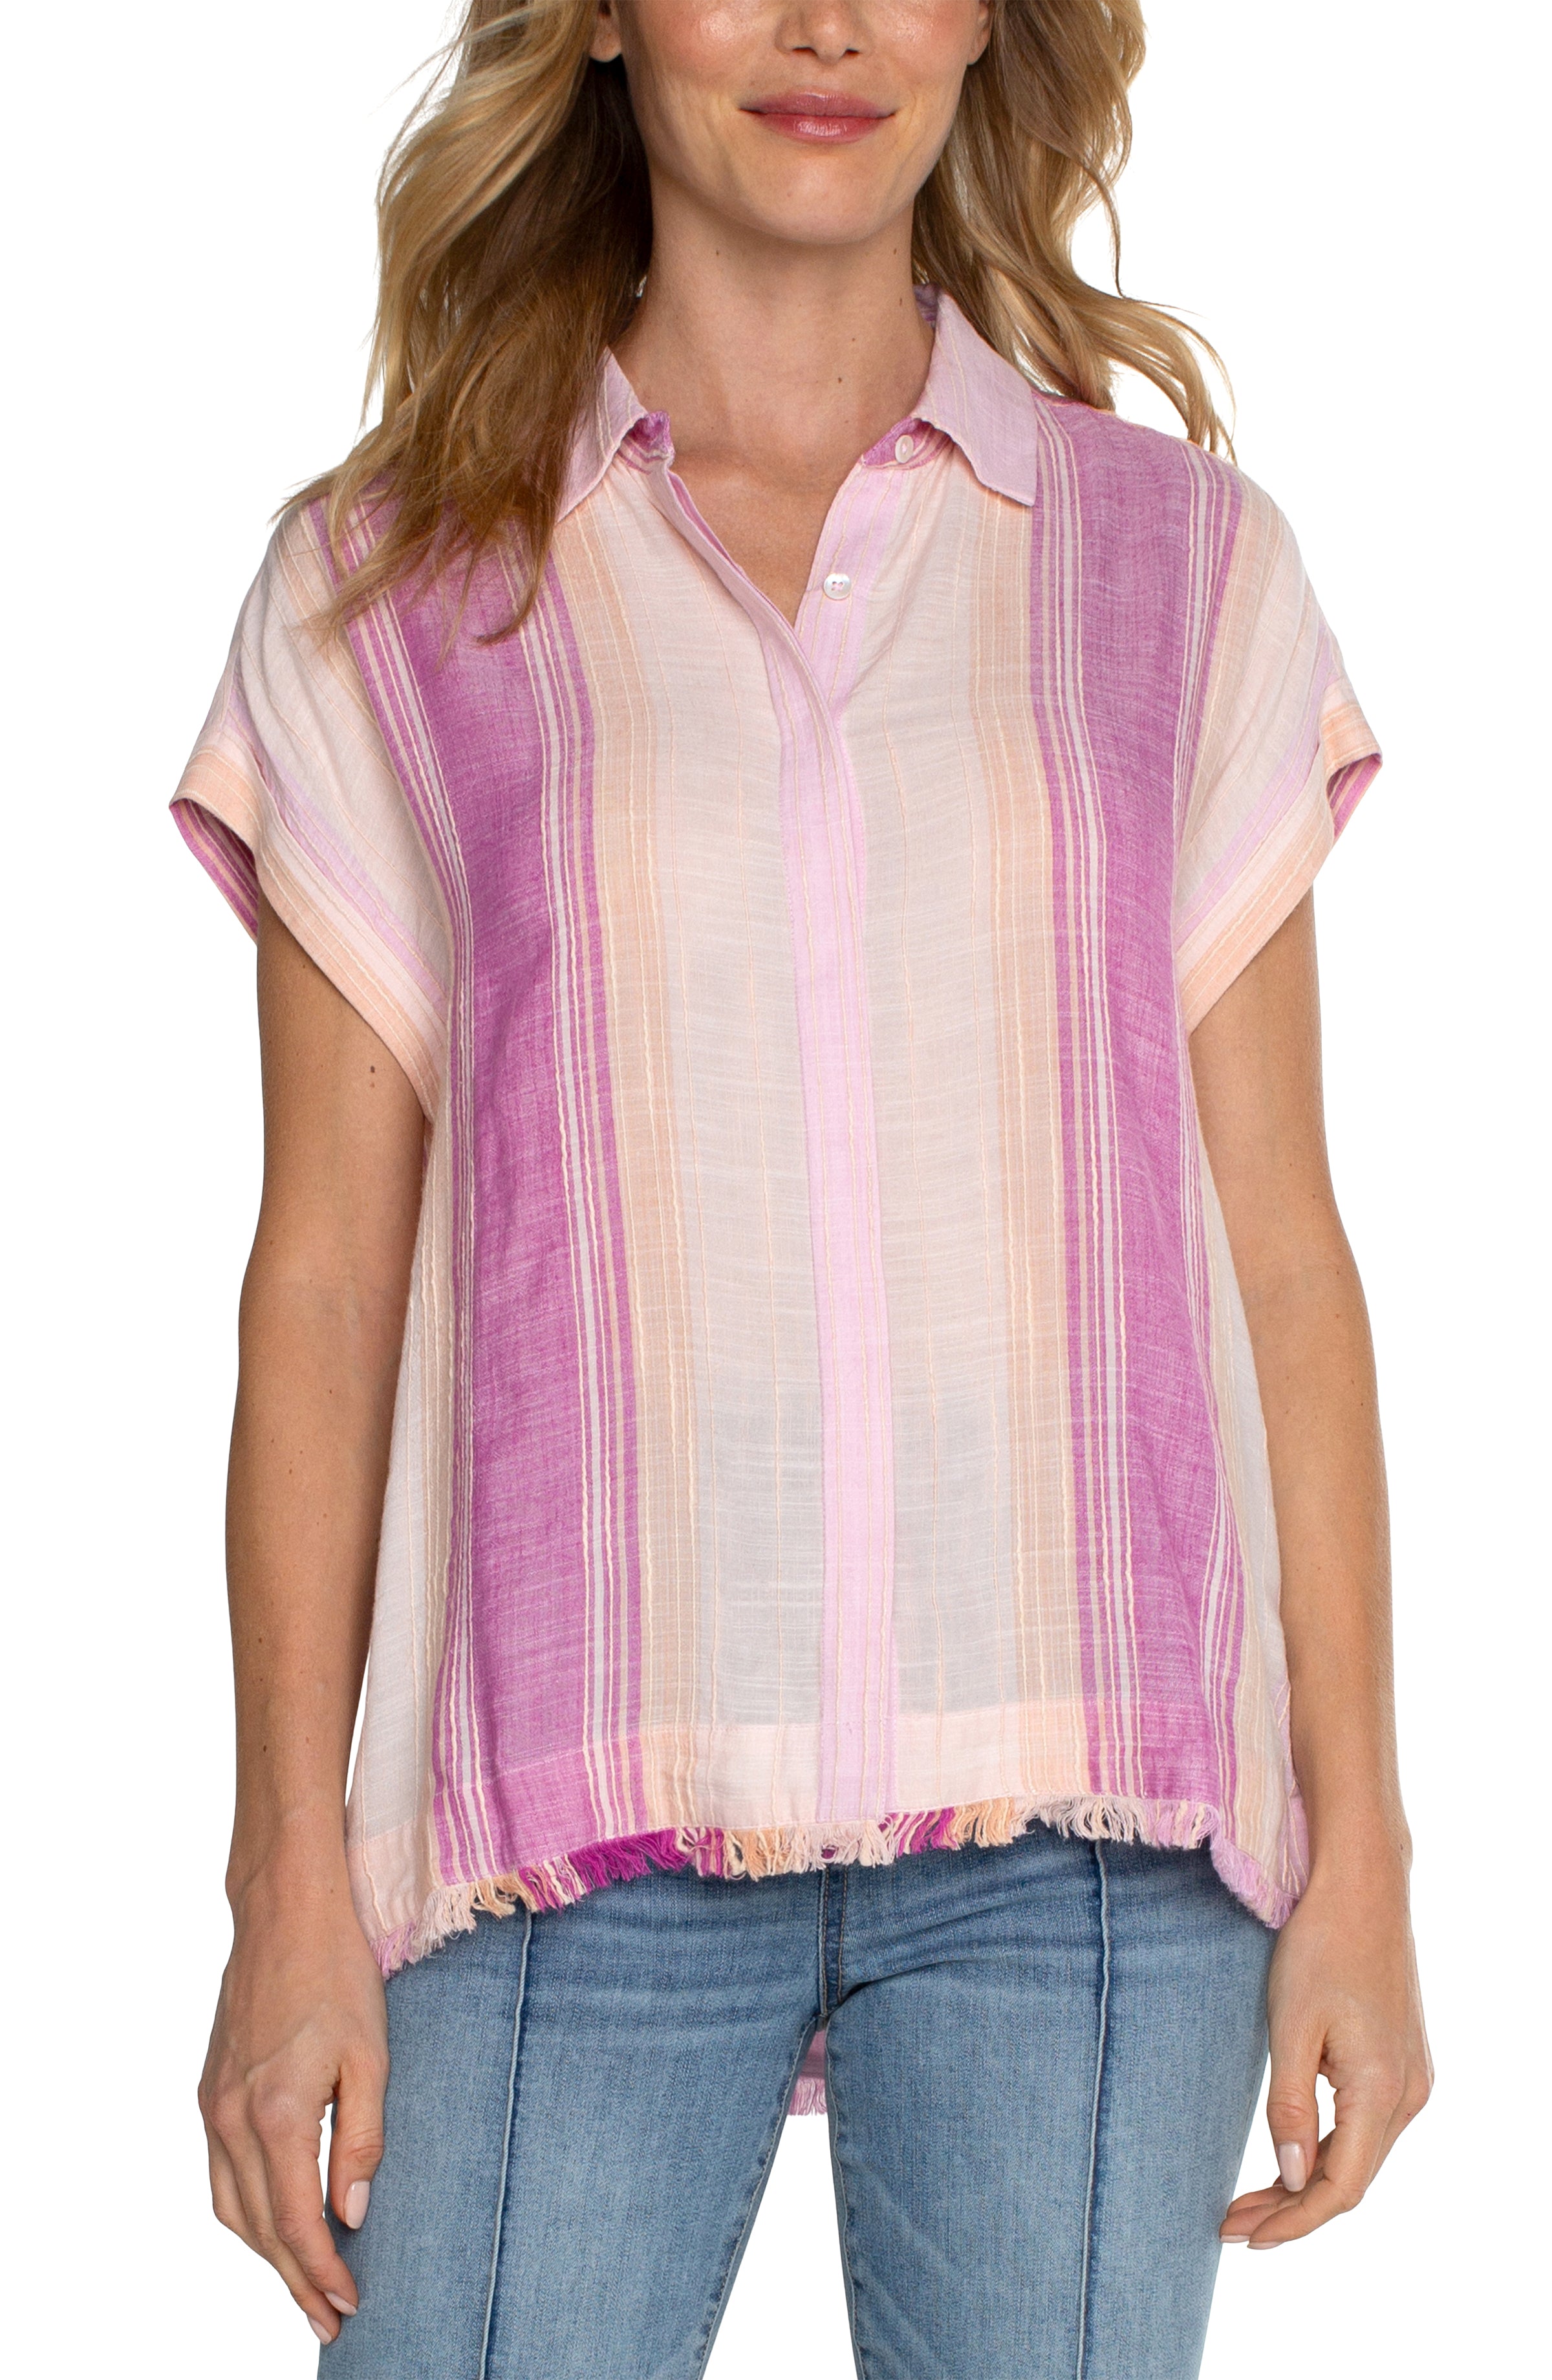 LVP Collared Camp Shirt - Lavender Front View